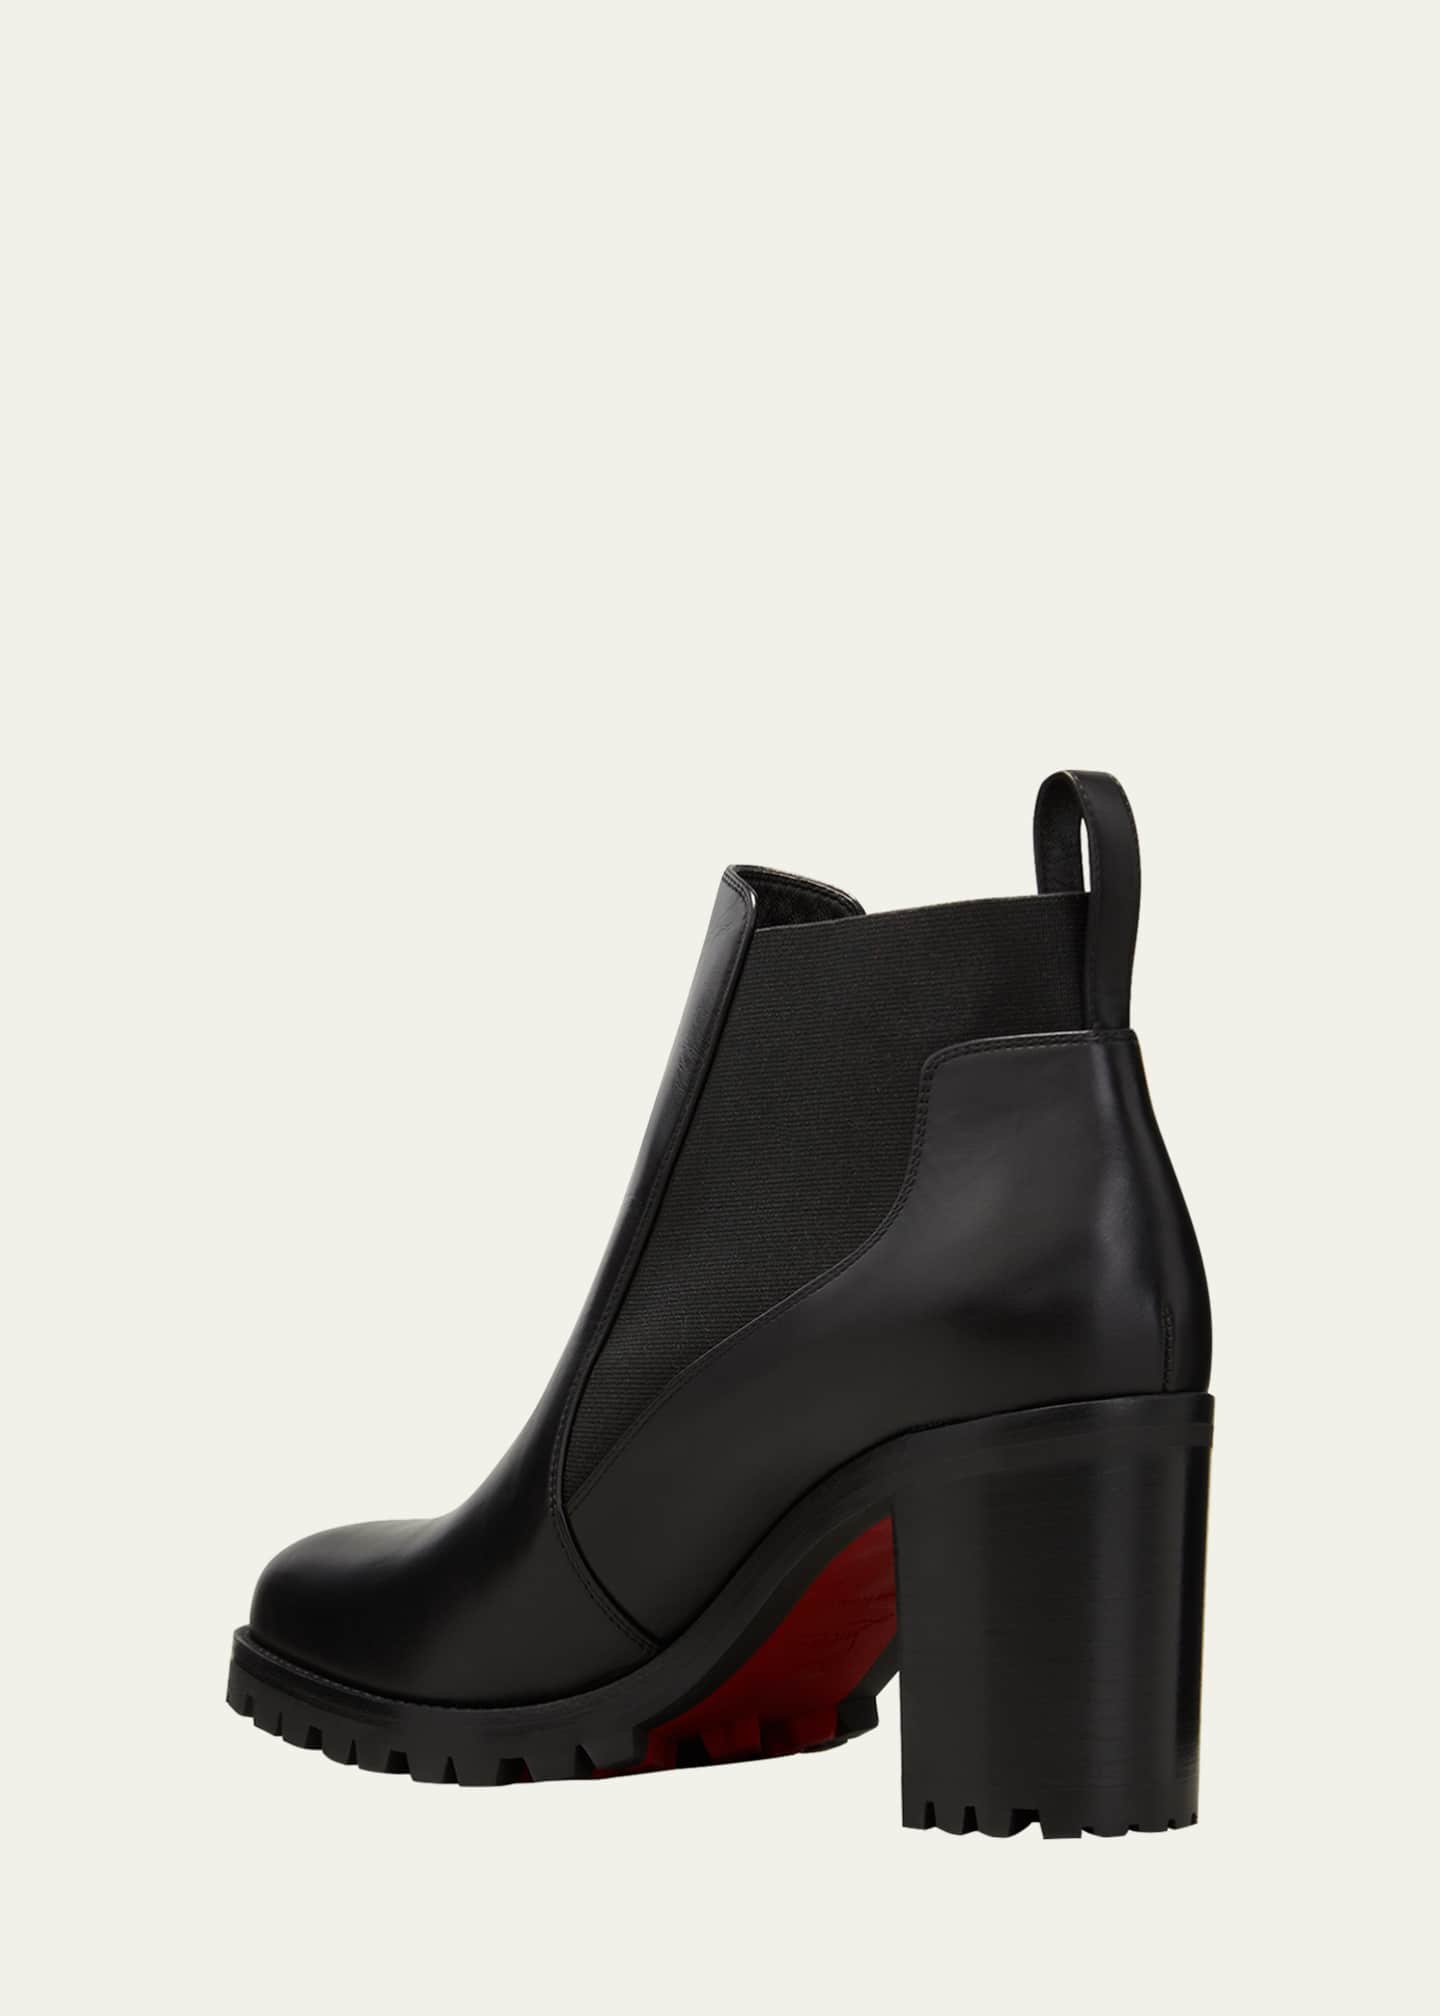 Christian Louboutin Marchacroche Leather Red Sole Booties - Bergdorf Goodman